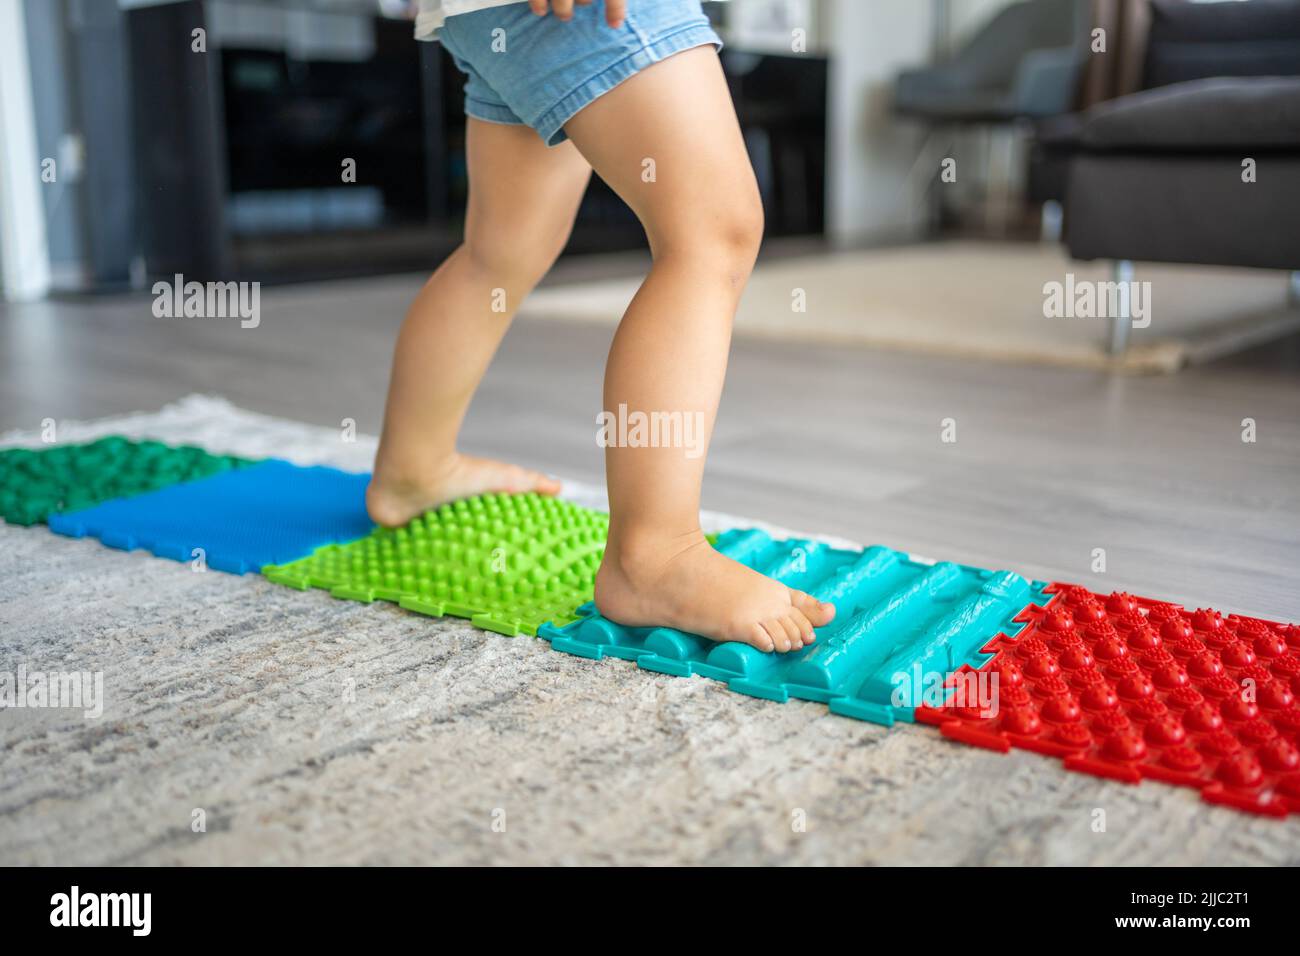 Close up view of Little girl walks on a massage mat. Toddler baby foot massage mat. Exercises for legs orthopedic massage carpet.  Stock Photo